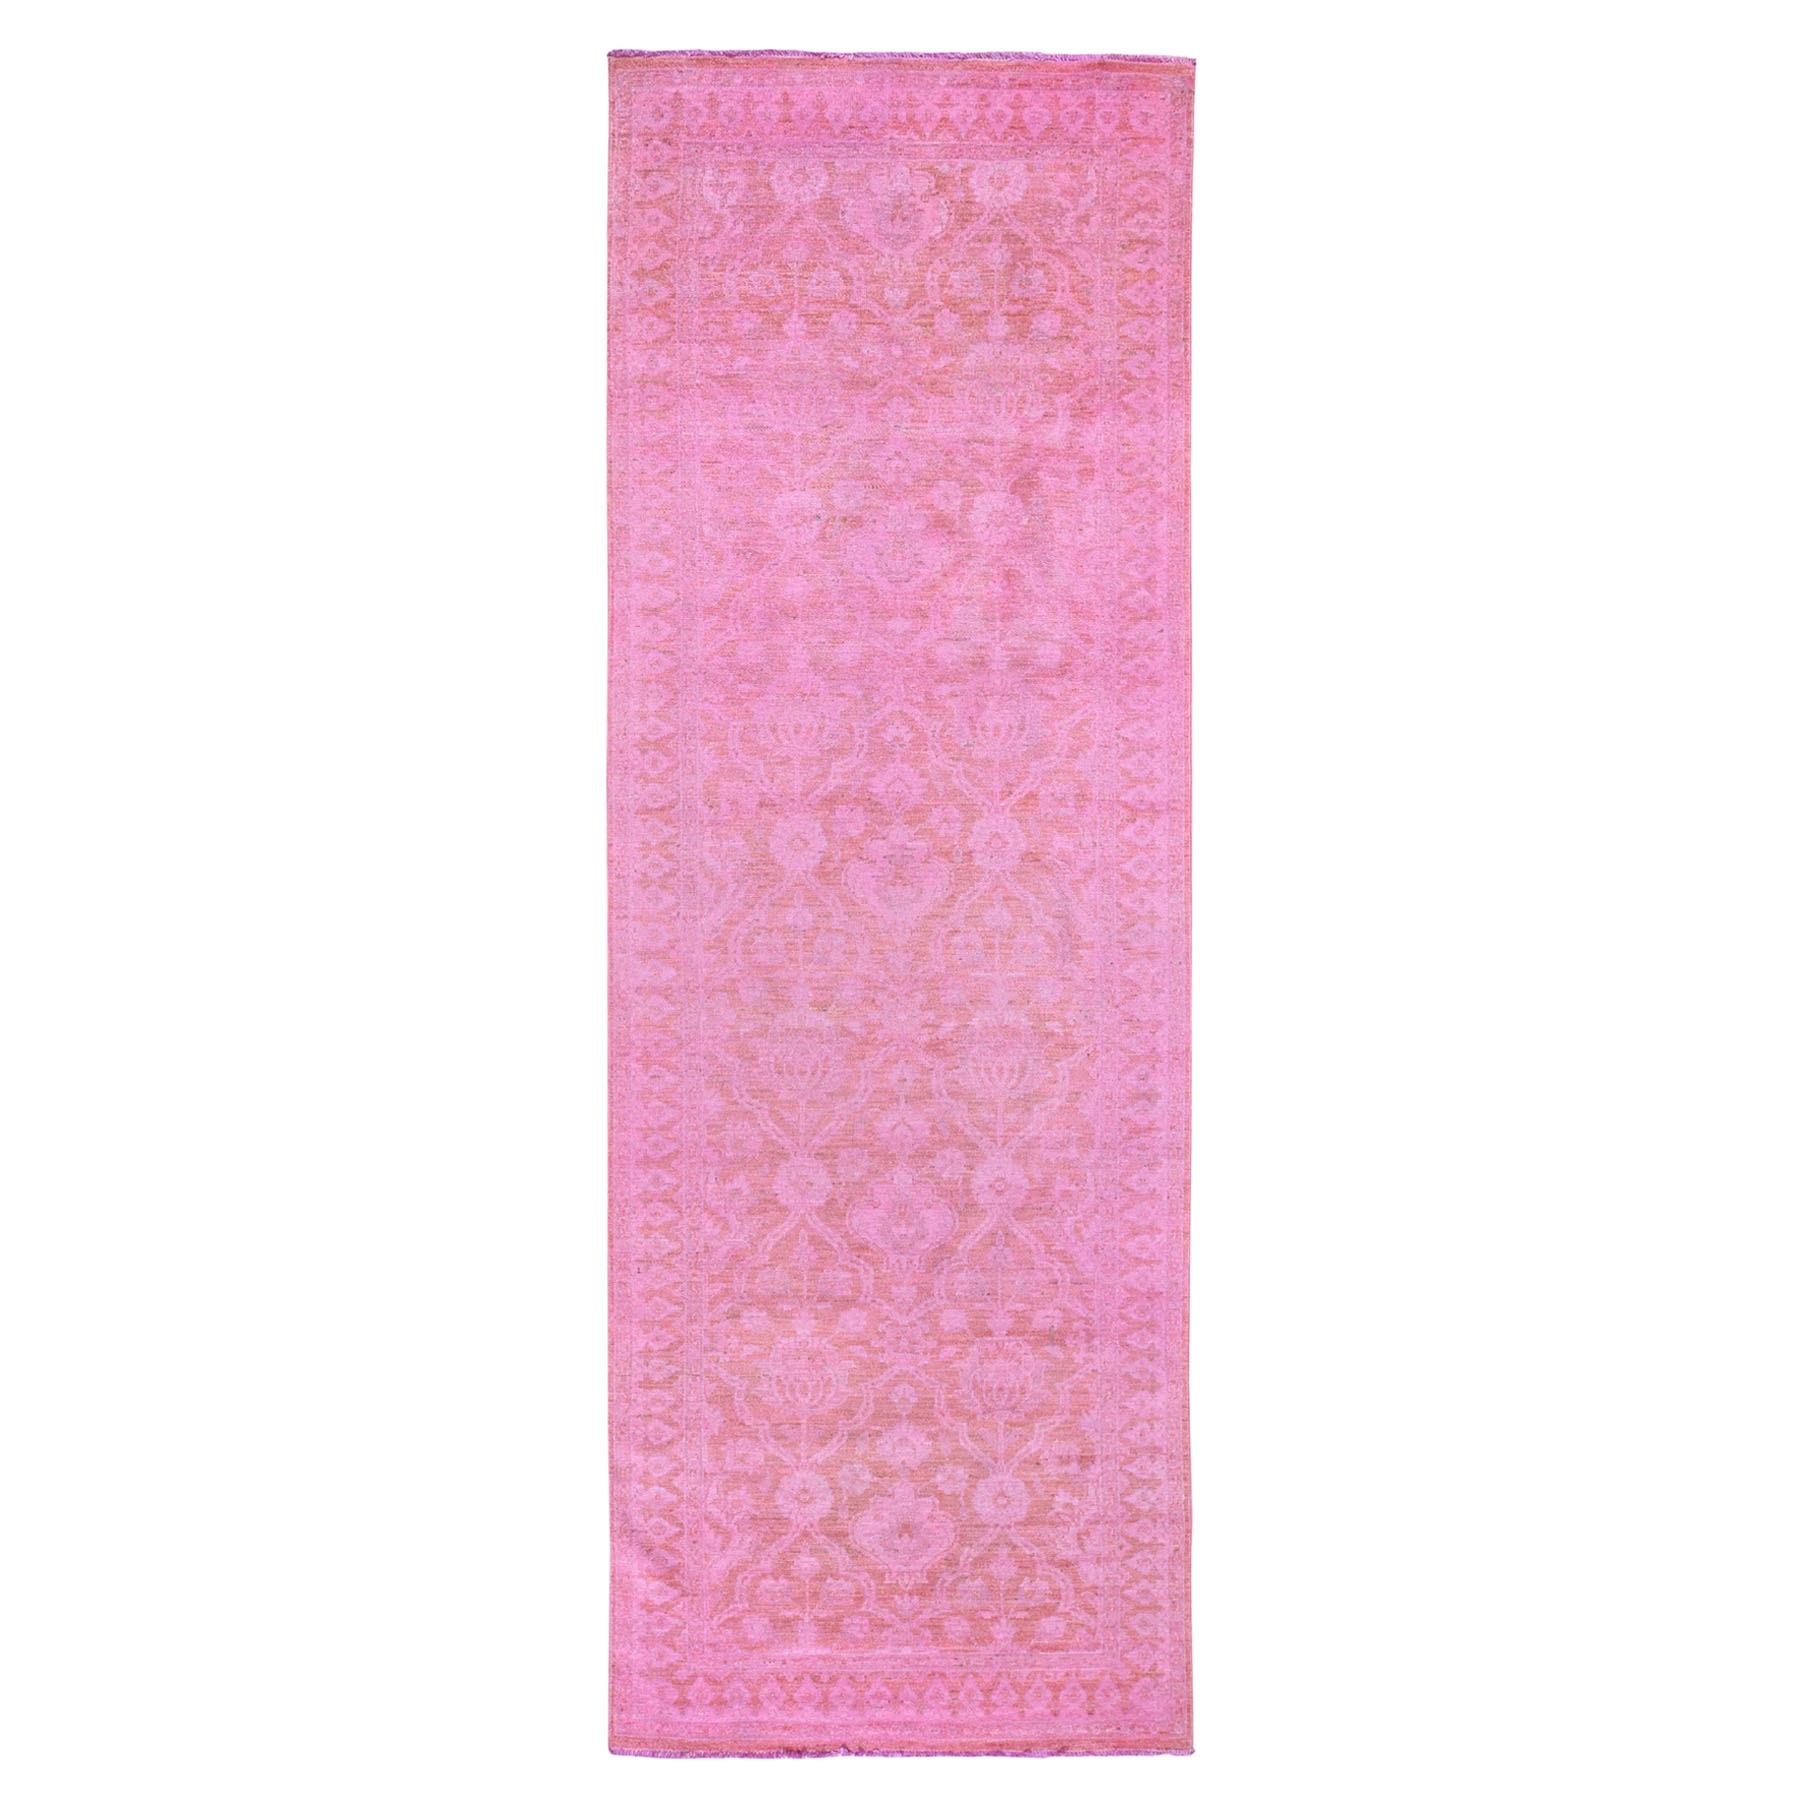 4'X12'2" Wide Runner Pink Overdyed Peshawar Hand Knotted Oriental Rug moad7c7c